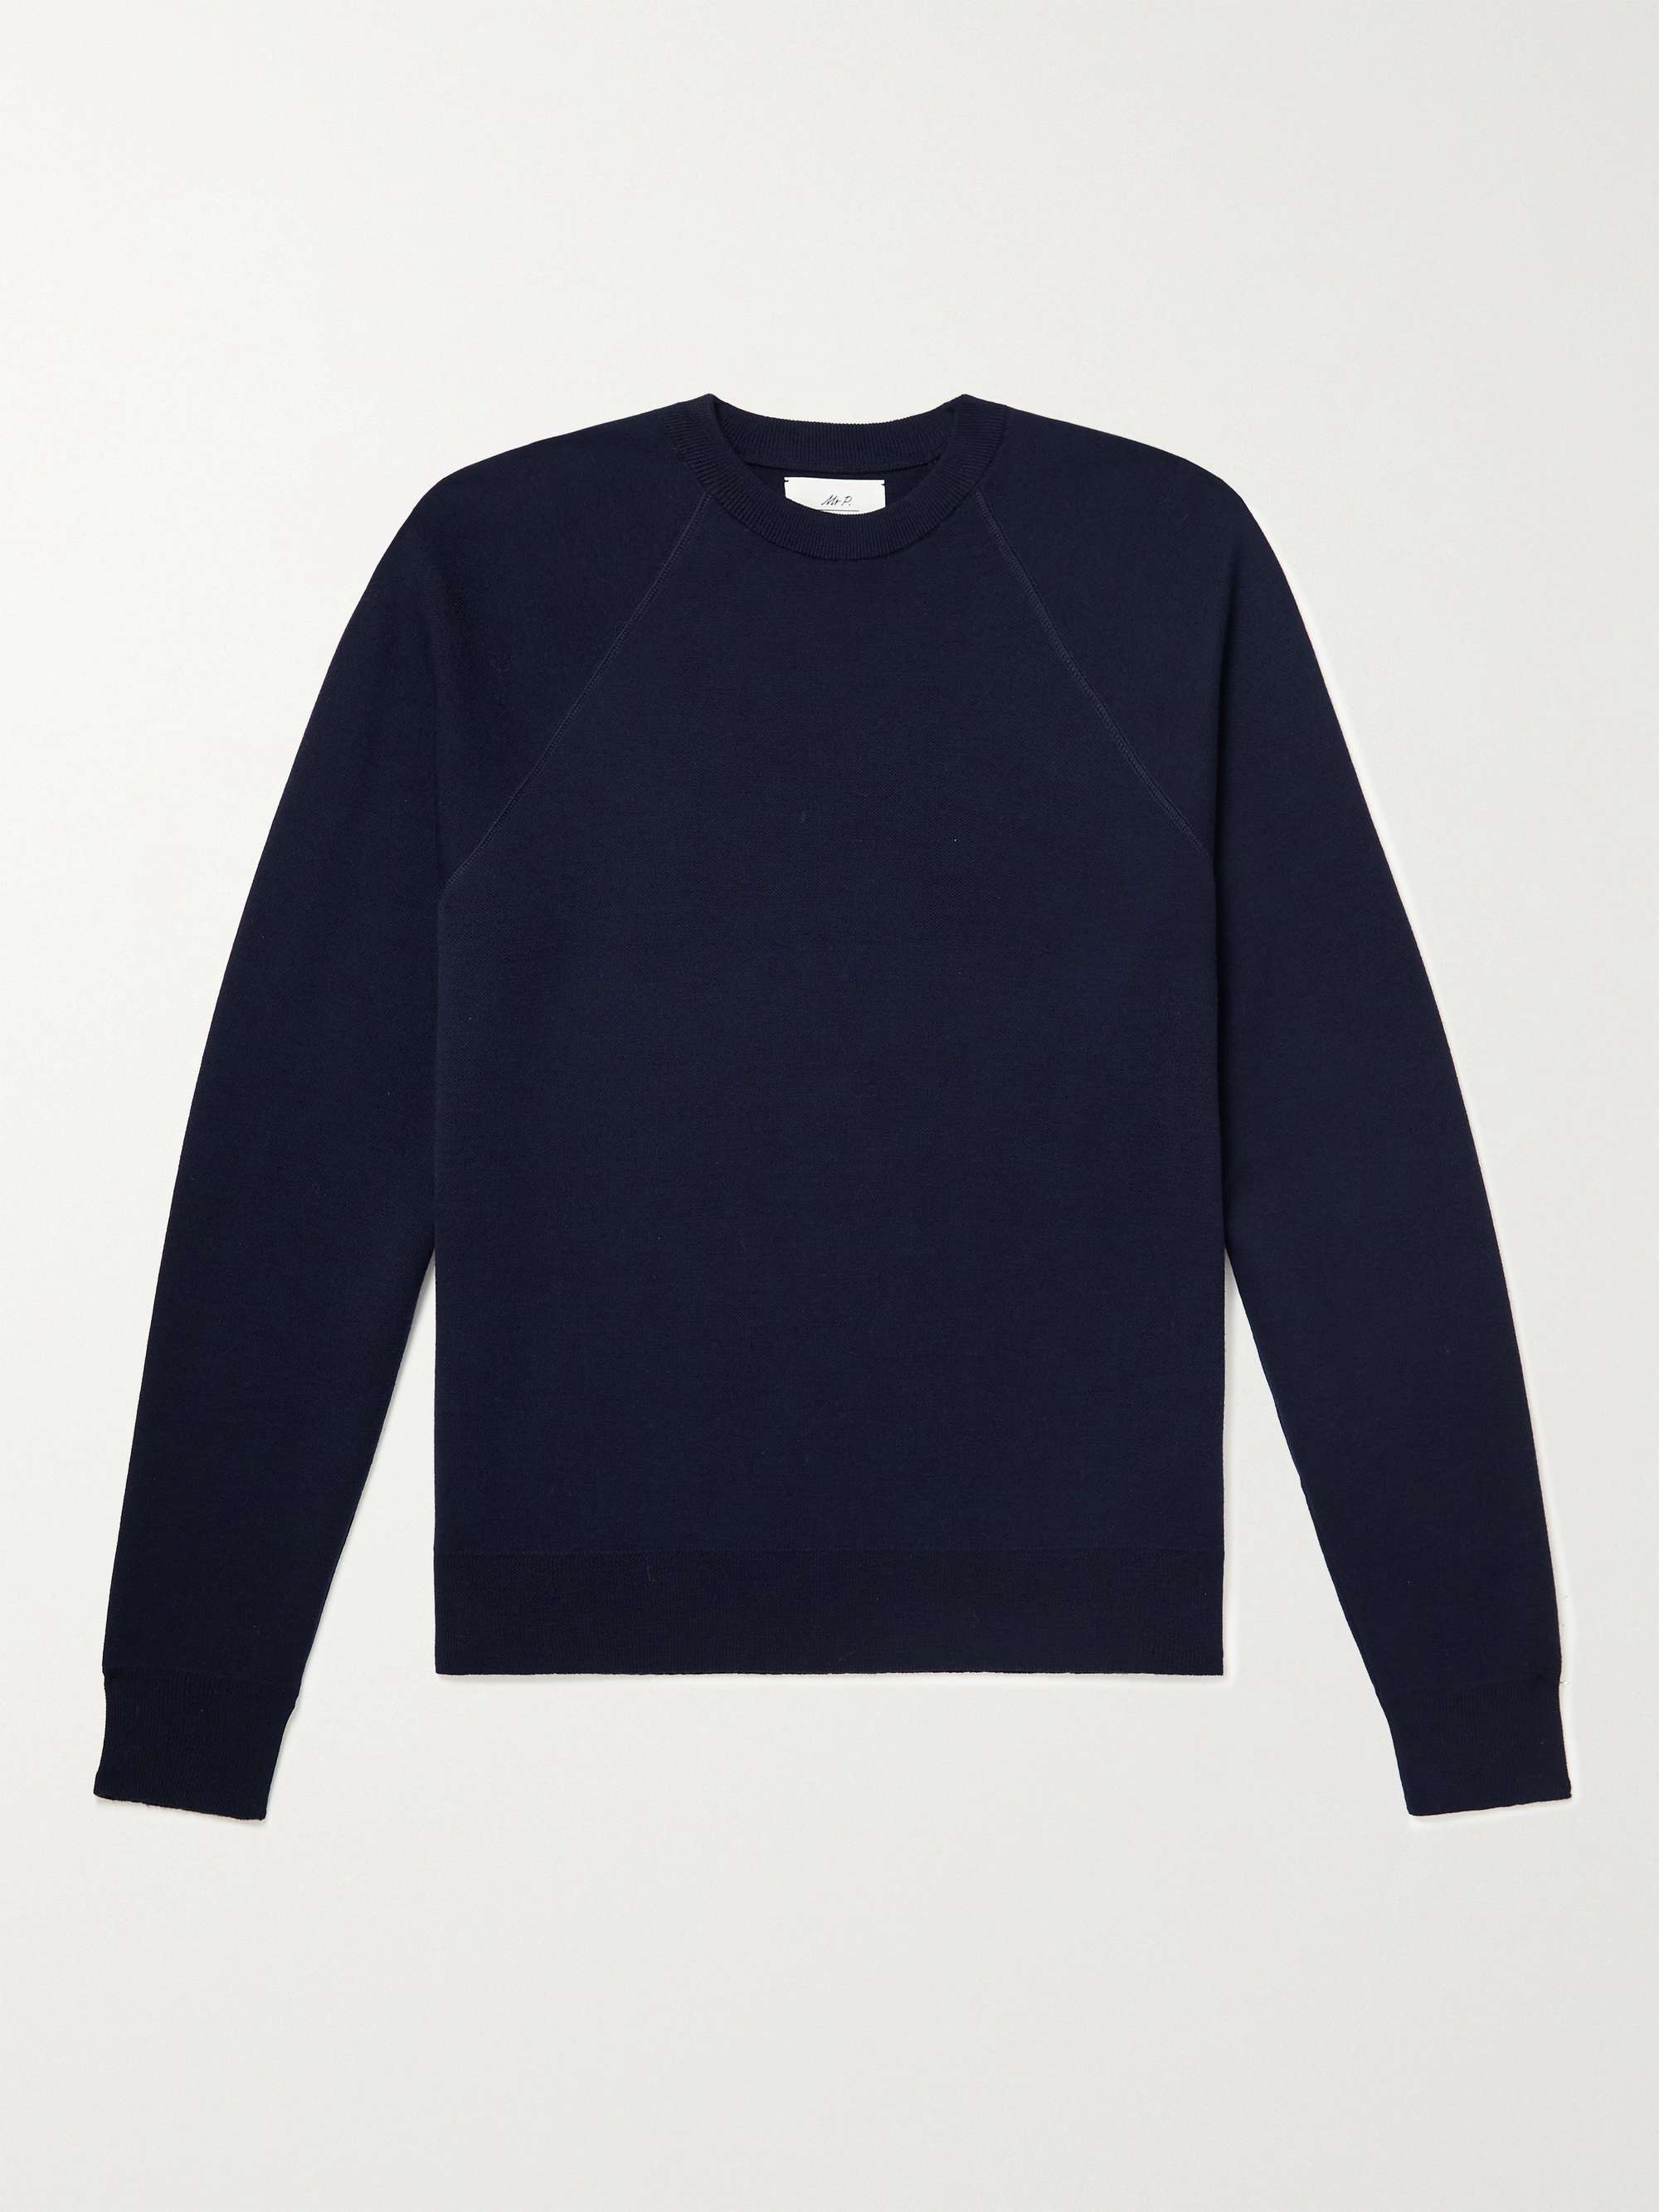 MR P. Double-Faced Merino Wool-Blend Sweater